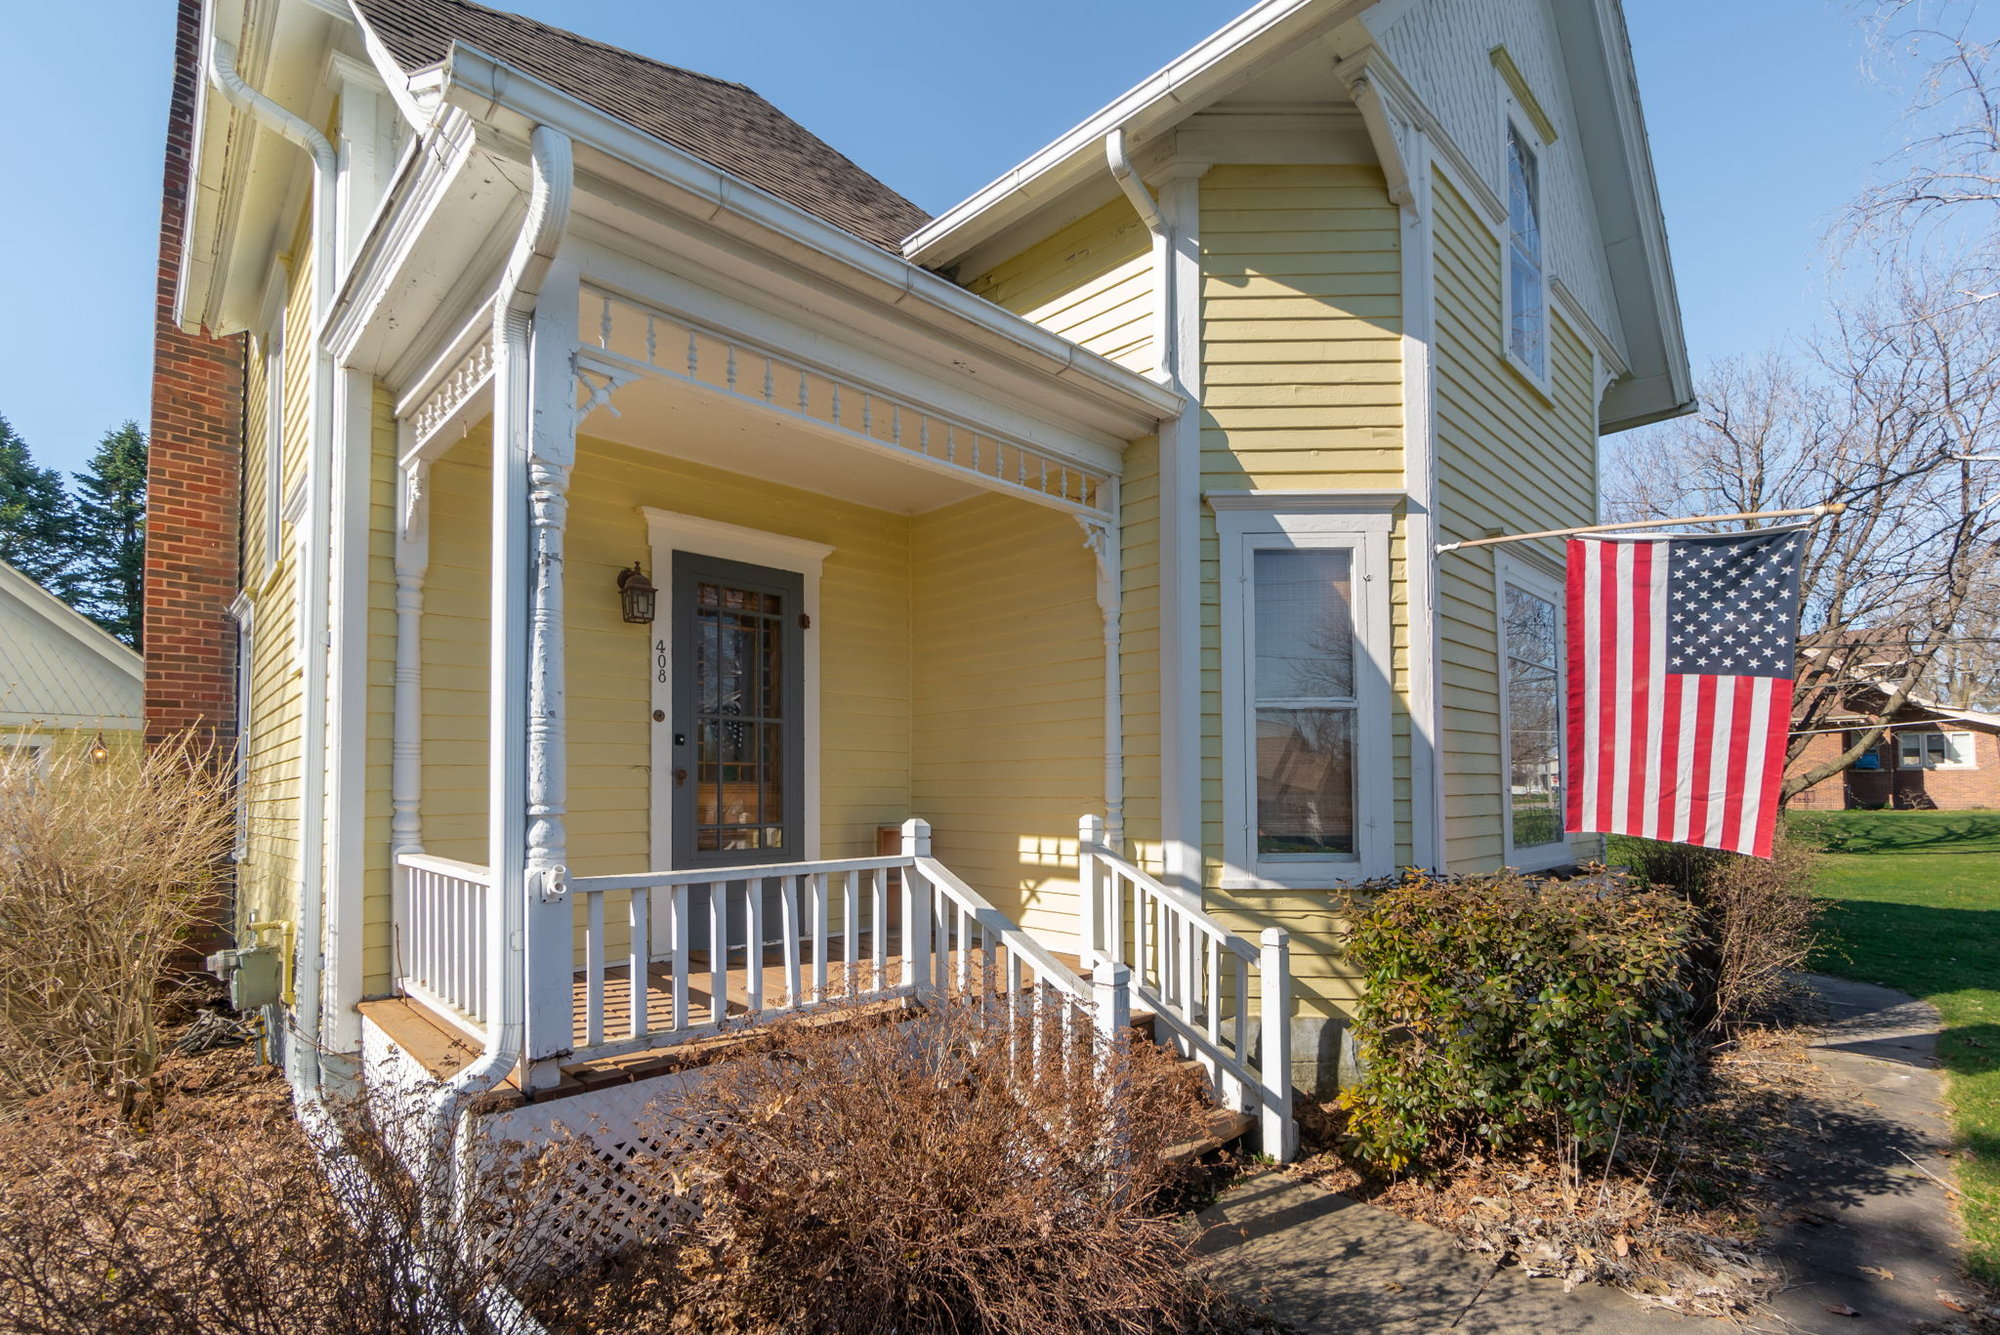 Find all the Beautiful Character in this Queen Anne Home 